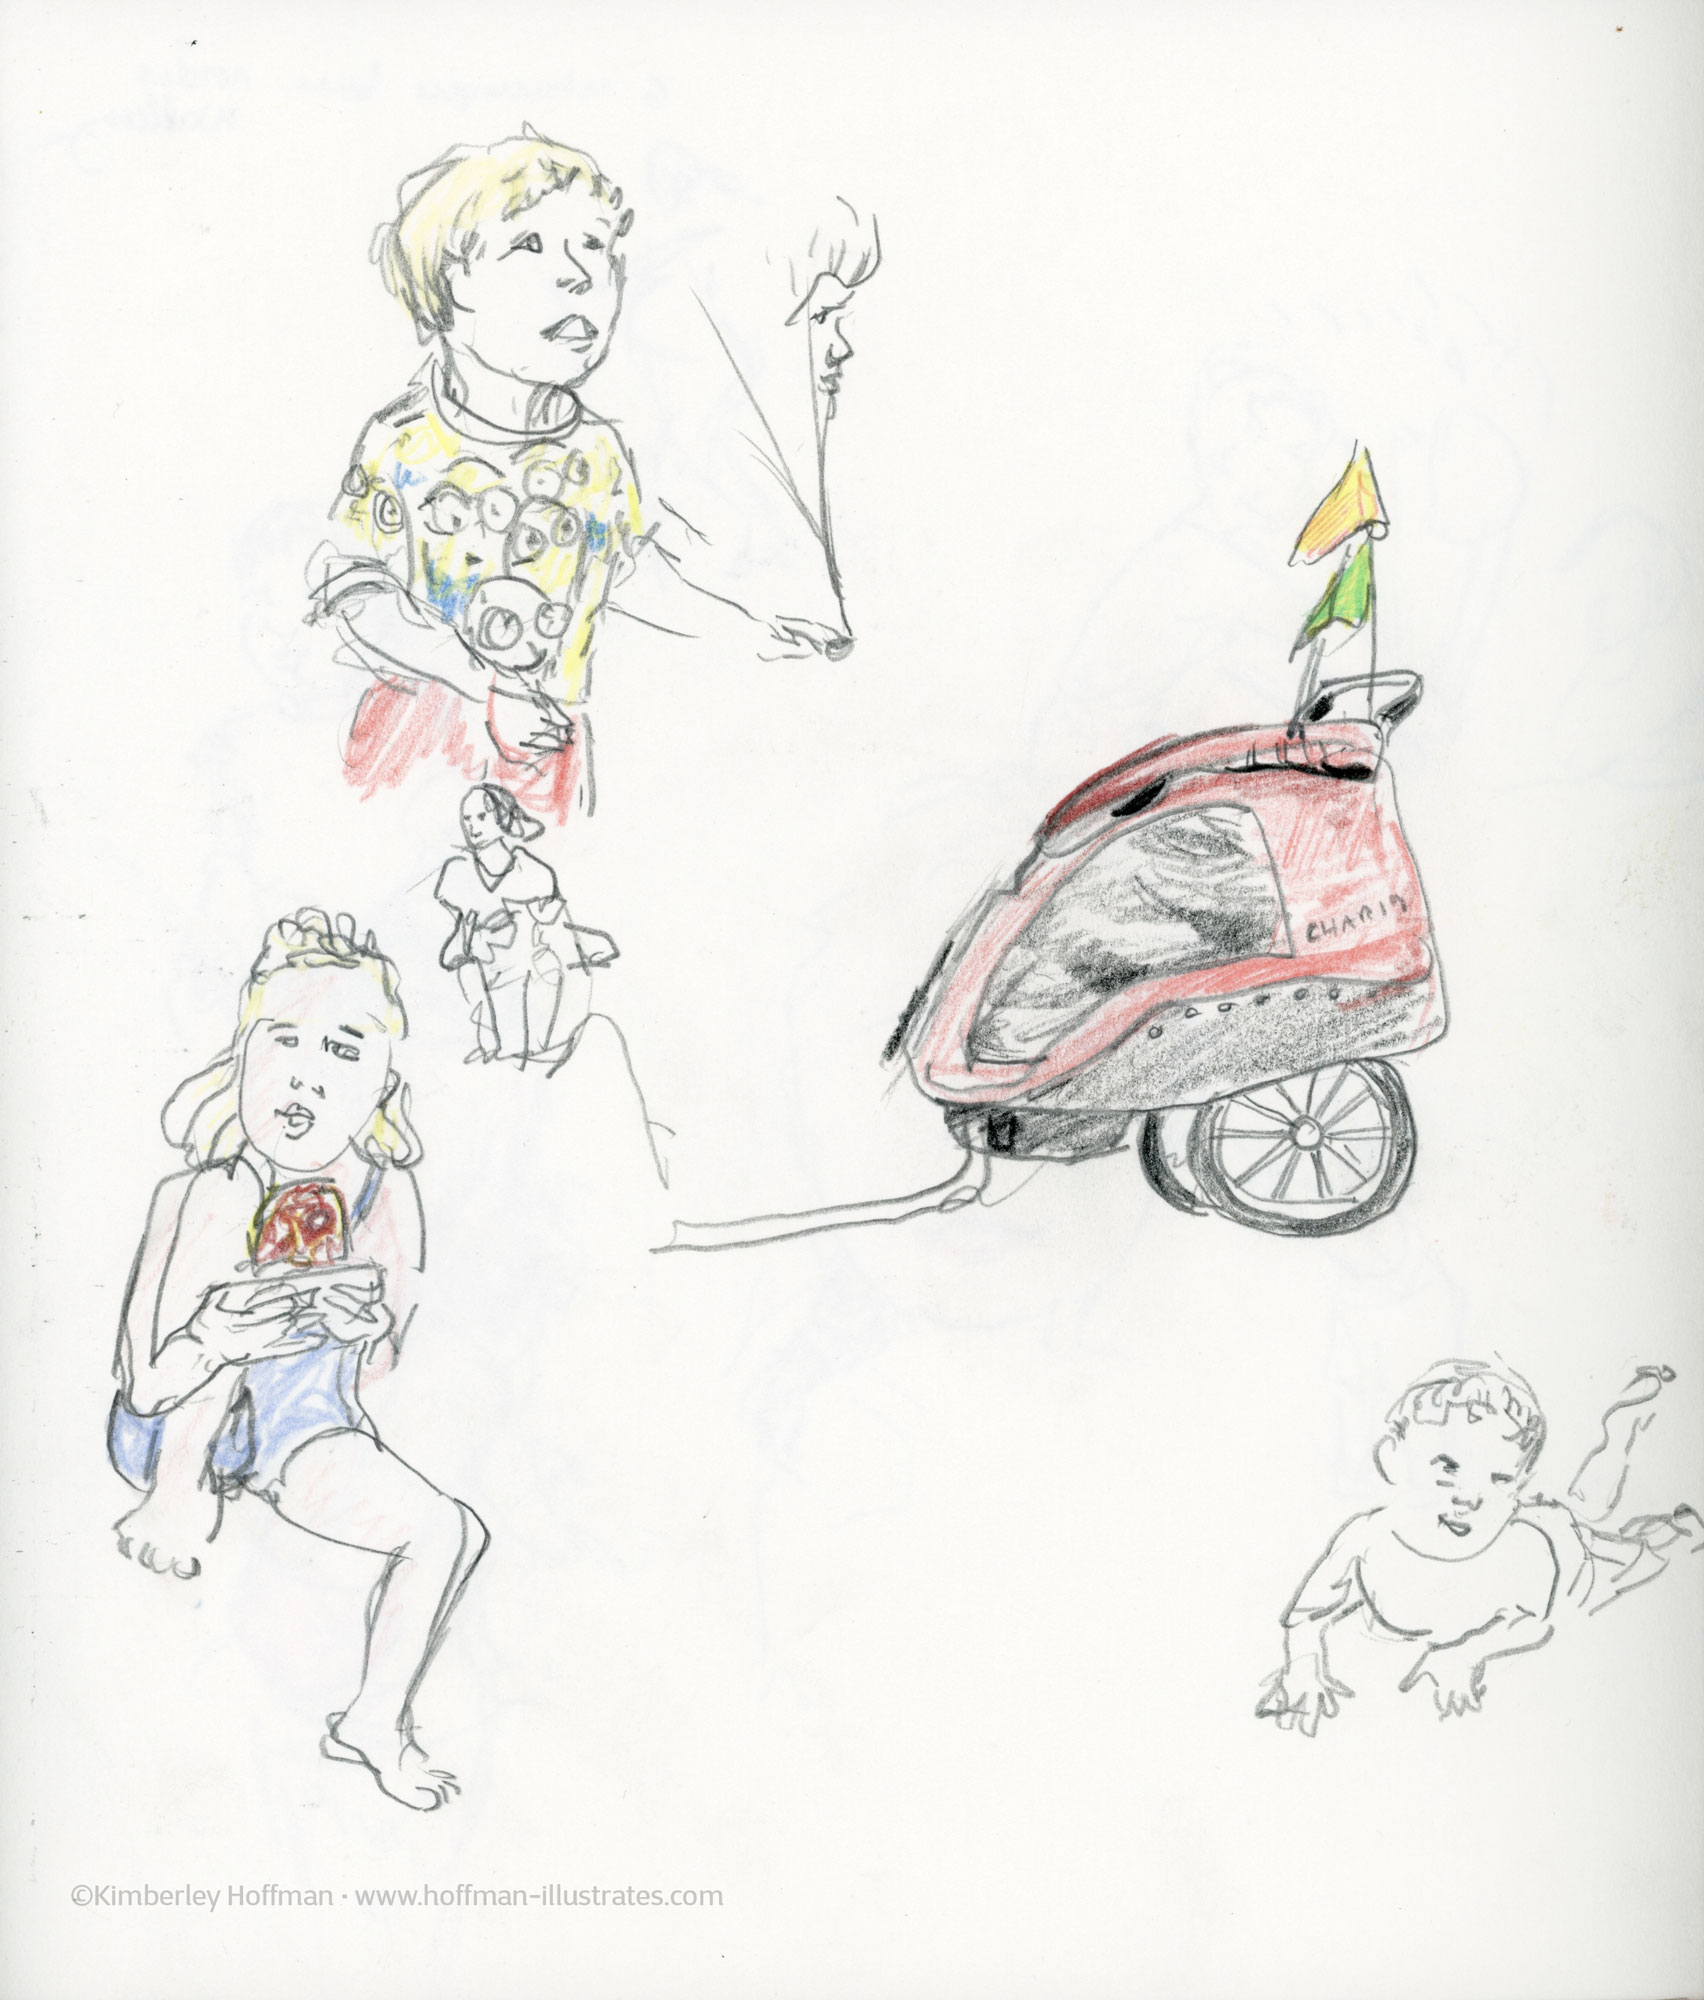 These are individual sketches I drew when I was working on the book "Heidelberg wimmelt" It shows three children and a chariot bike trailer, which is red and black. The child in the left corner wears a minion print t-shirt. The girl in the left corner has her right knee hugged while she eats a snack. The bike trailer is on the right in the middle of the page and in the lower right corner is an uncolored sketch of a baby on its tummy.